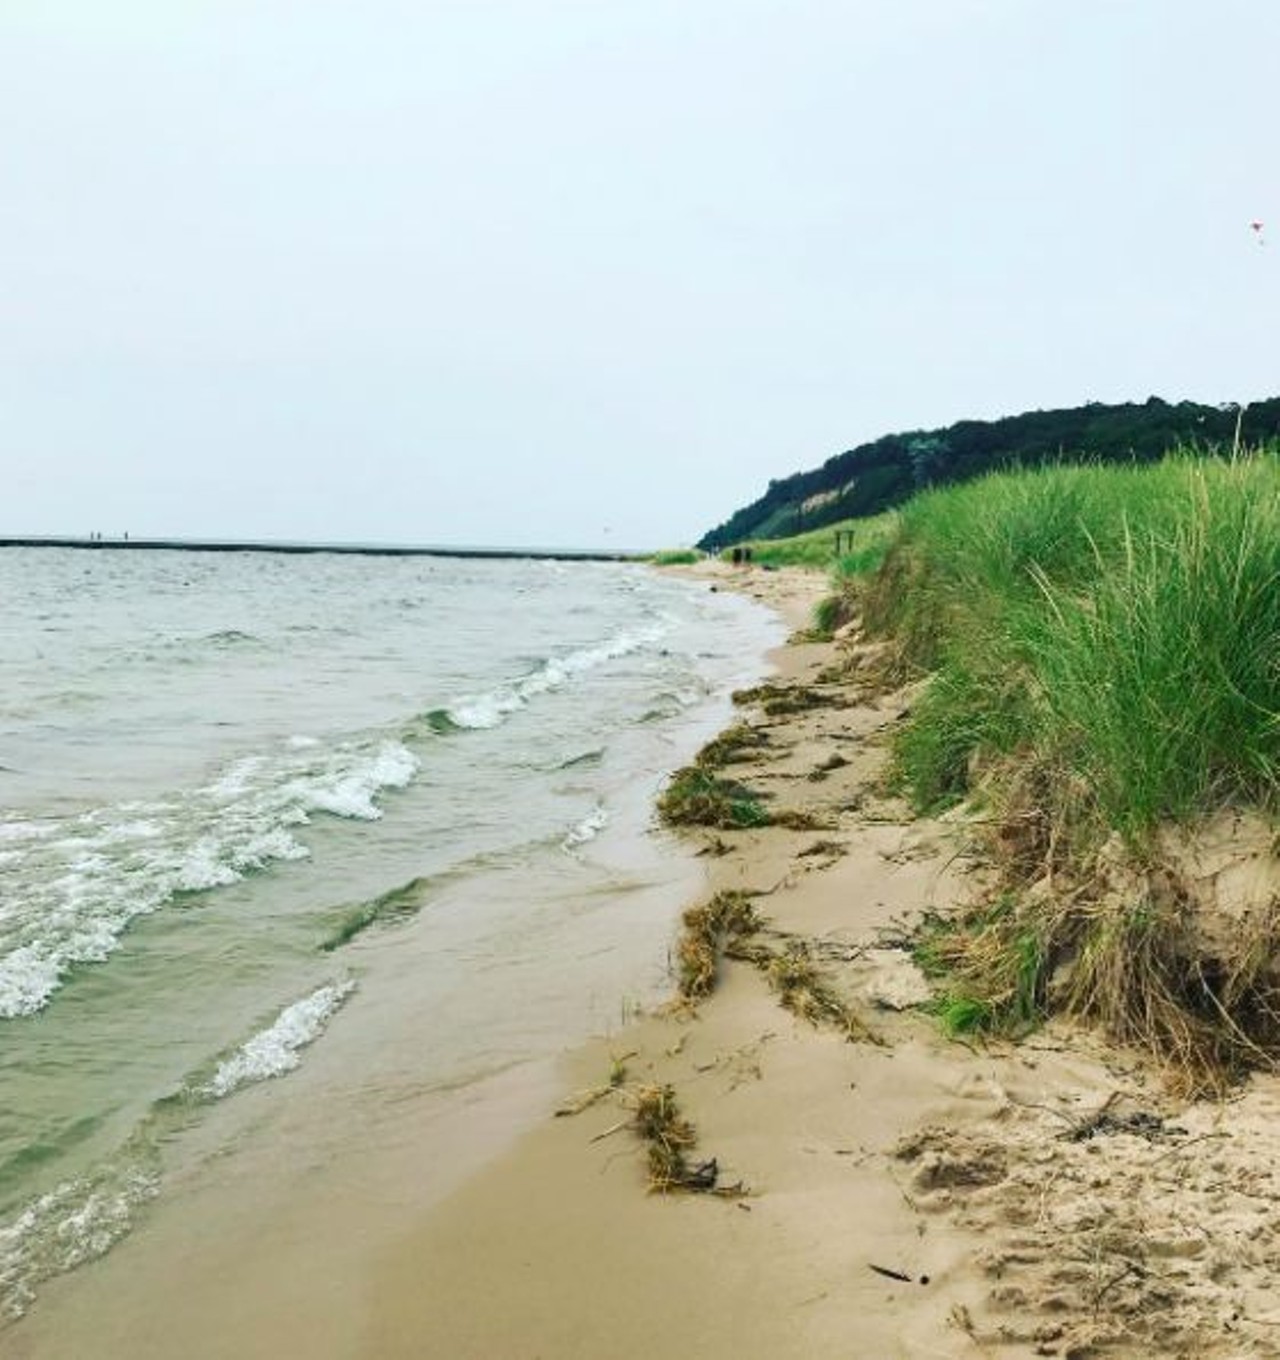 Frankfort Lake Michigan Beach
Frankfort; 4 hours, 2 minutes
Frankfort Beach is known for its views of Sleeping Bear Dunes, quaint atmosphere, and its covetable surrounding houses. Not to mention, it's been called a "sunset haven" by regular visitors. Free.
Photo via IG user @jillian_n_charlie